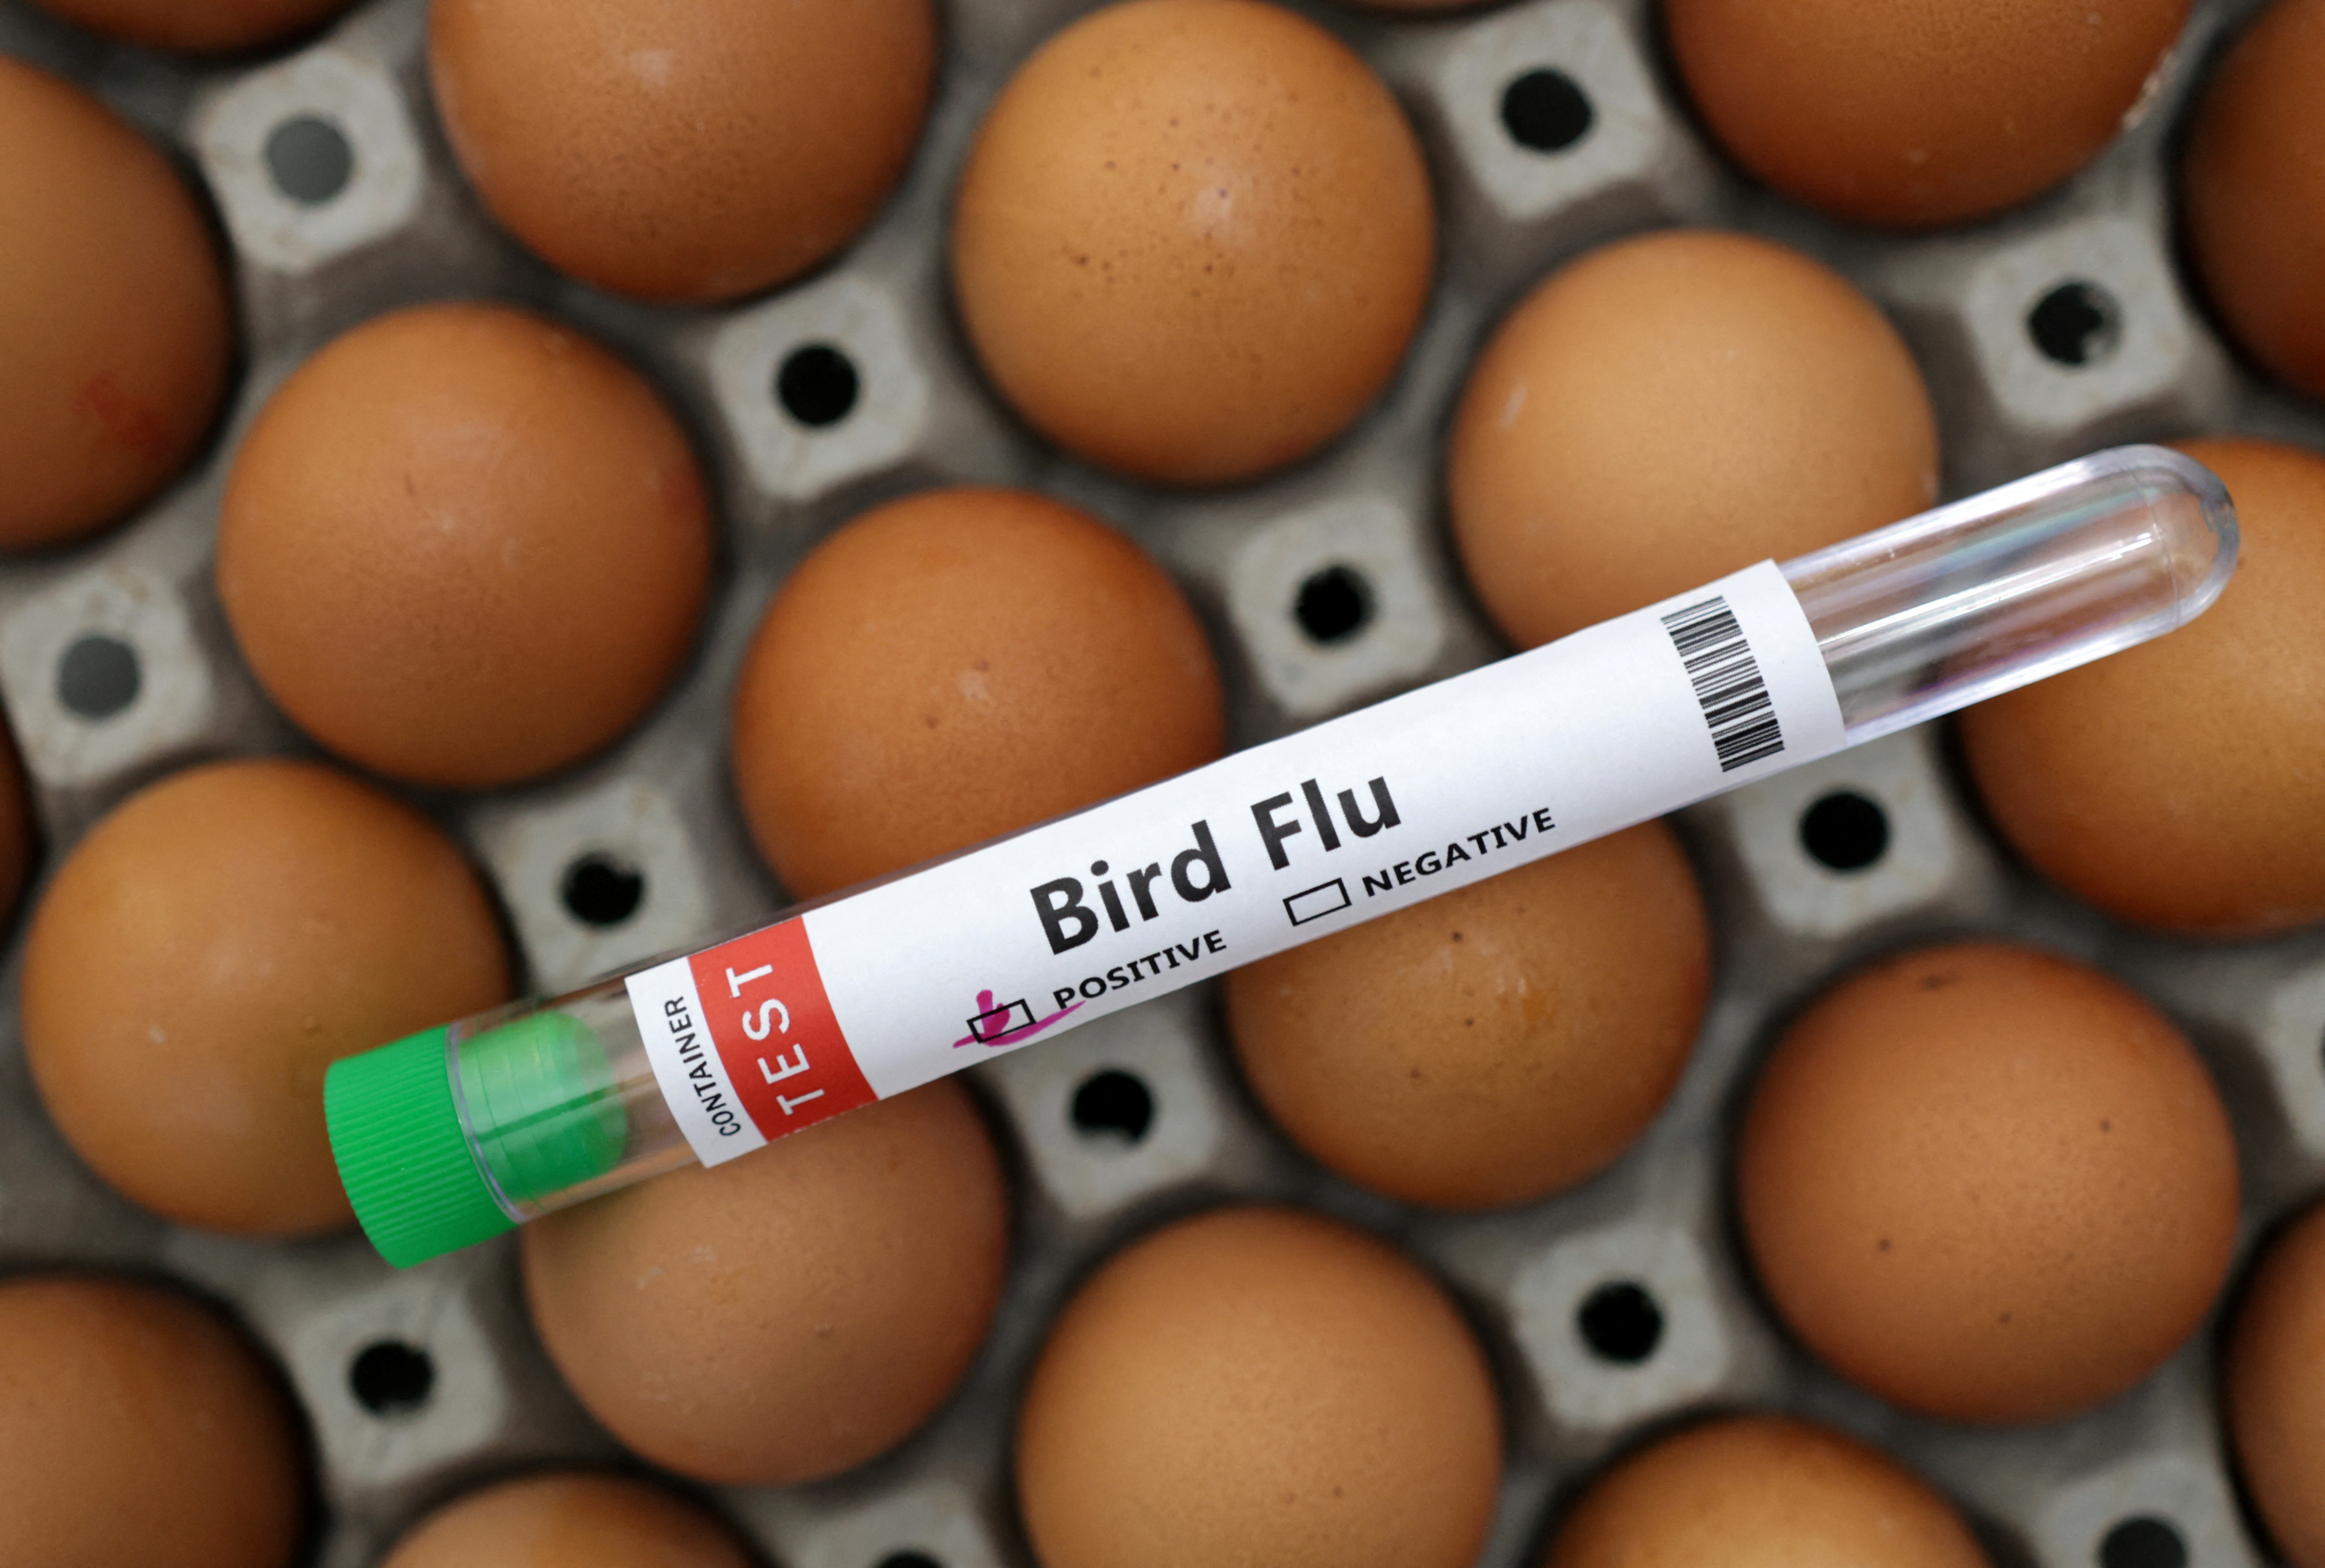 Illustration shows test tube labelled "Bird Flu" and eggs